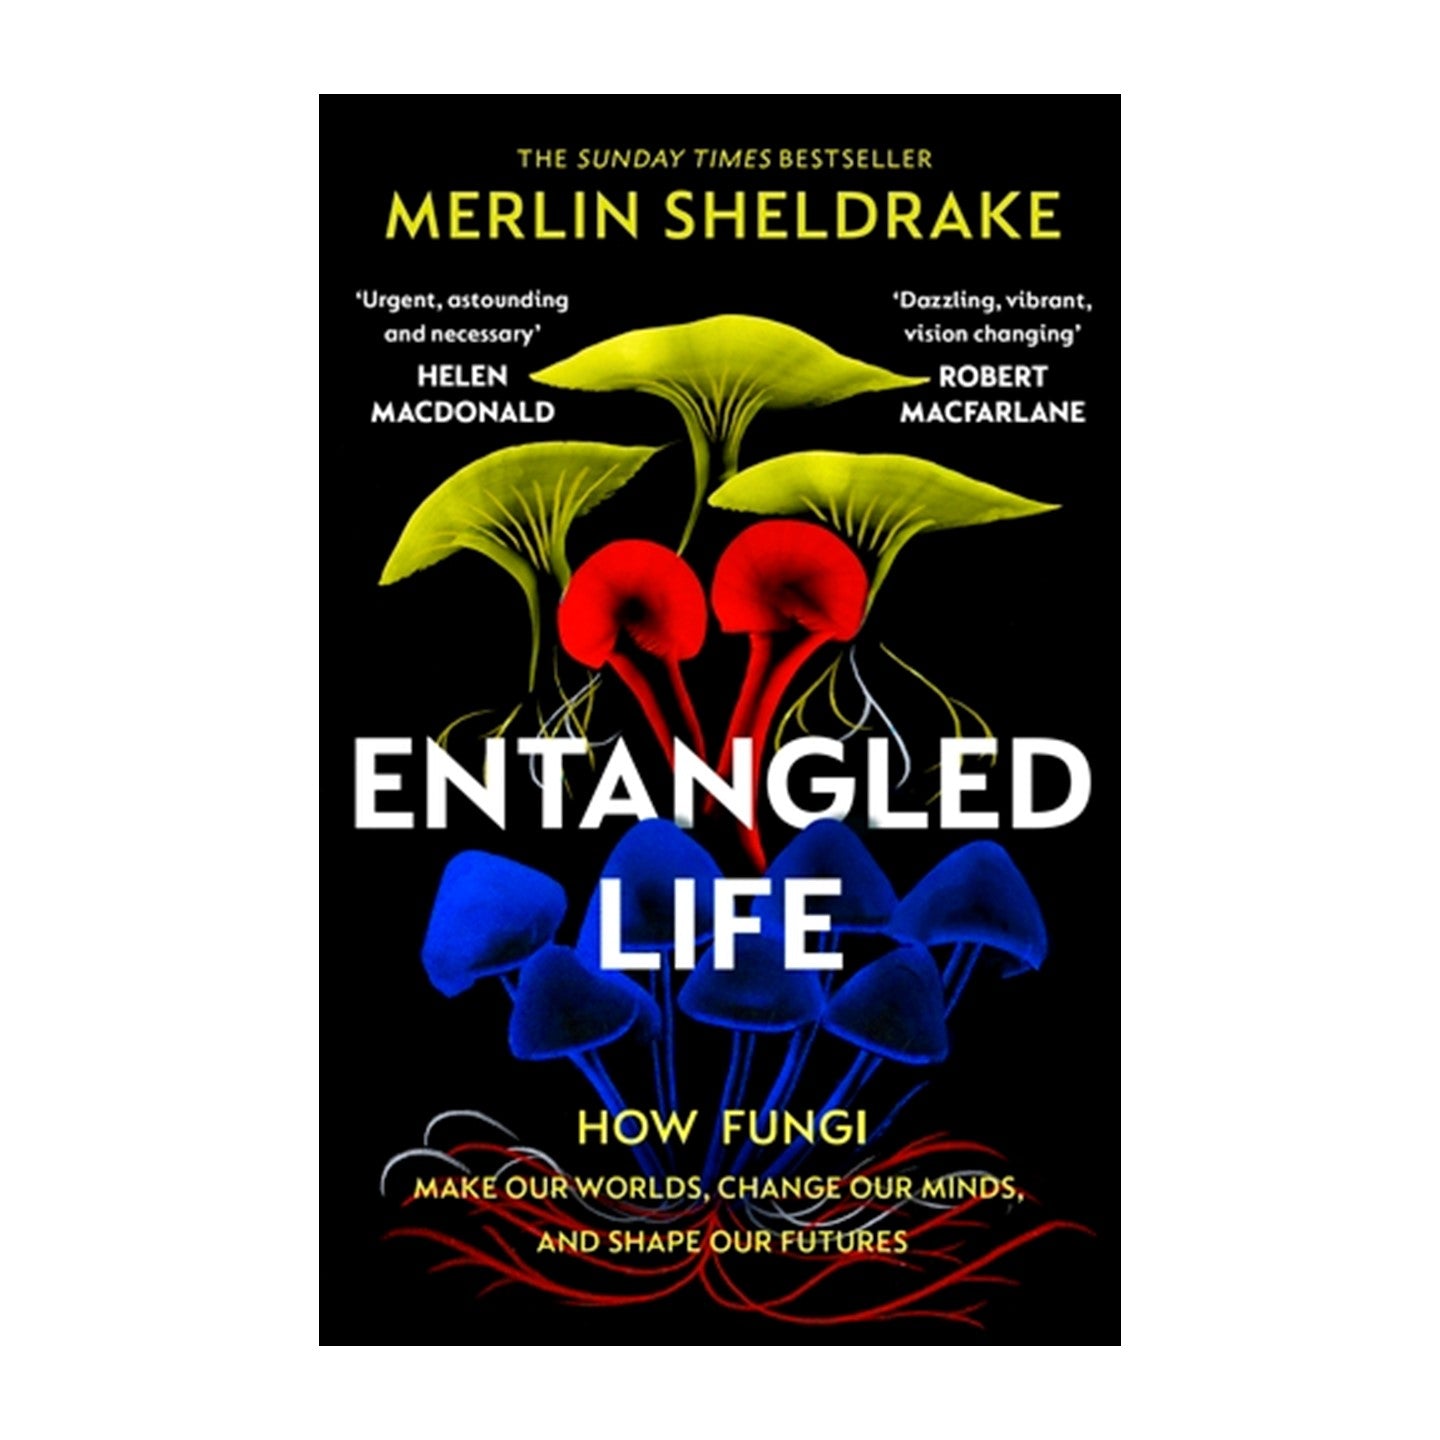 Entangled Life: How Fungi Make Our Worlds